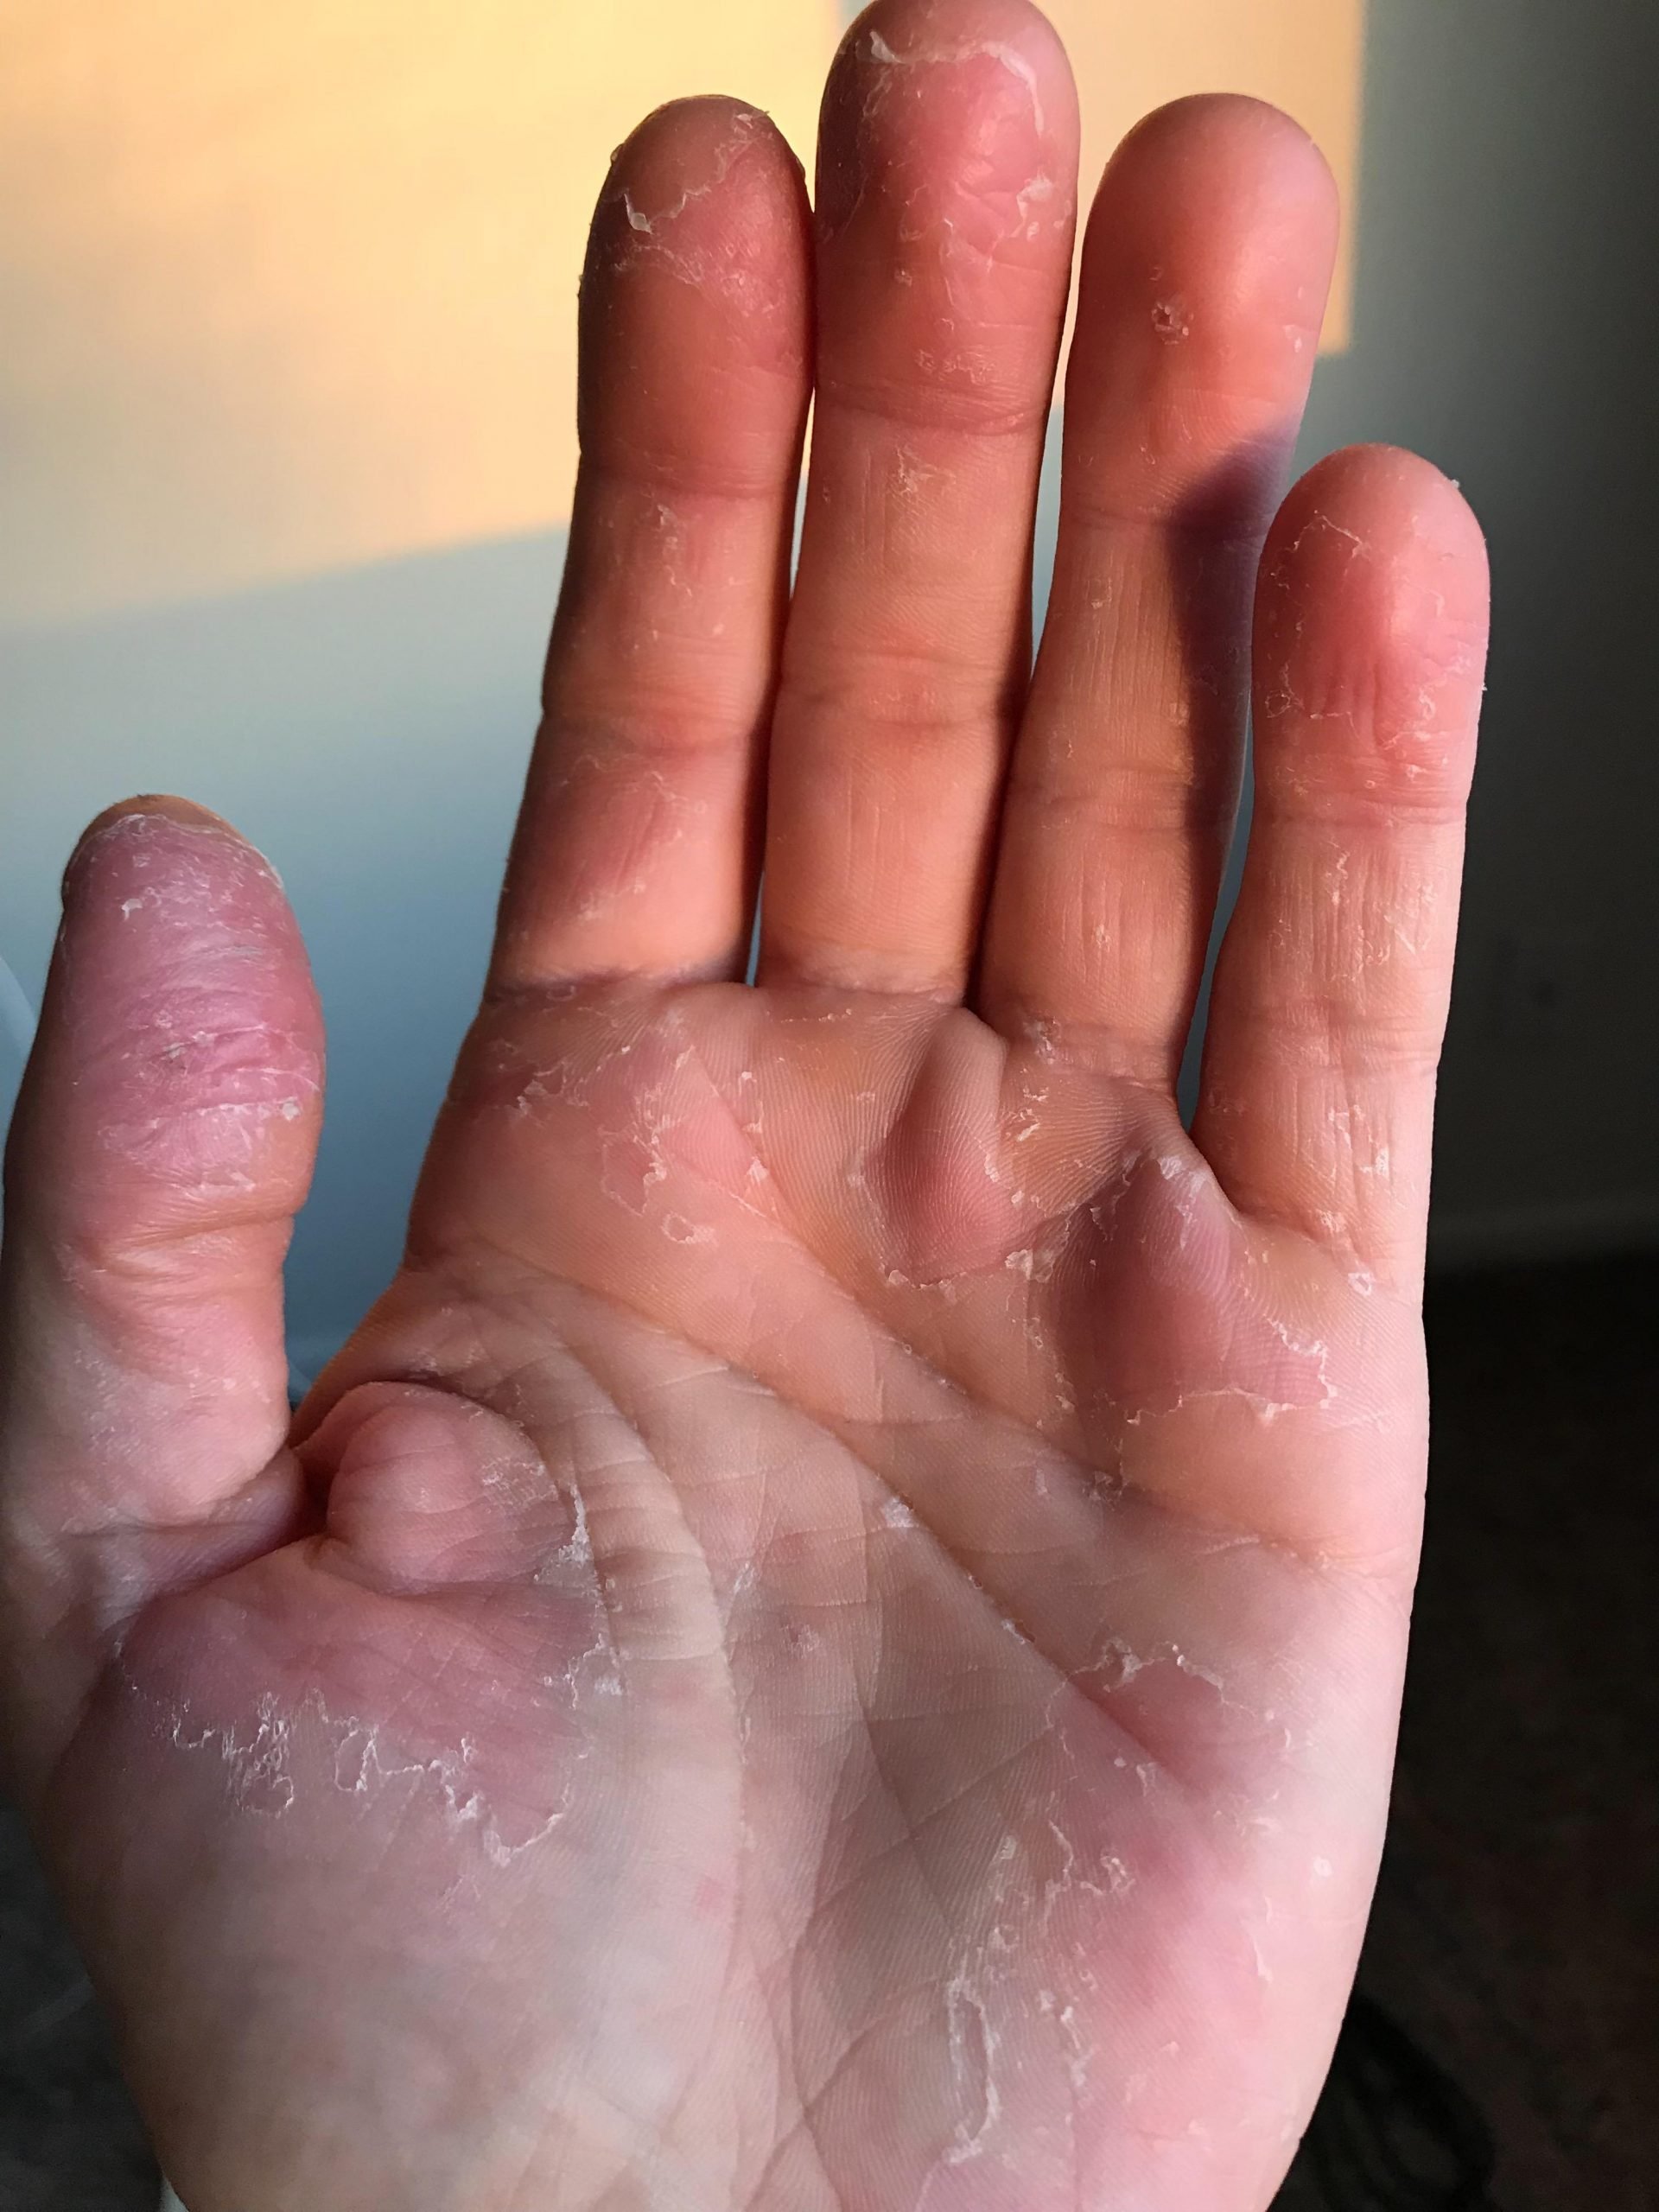 First flare up and just diagnosed with eczema on hands. Given steroid ...